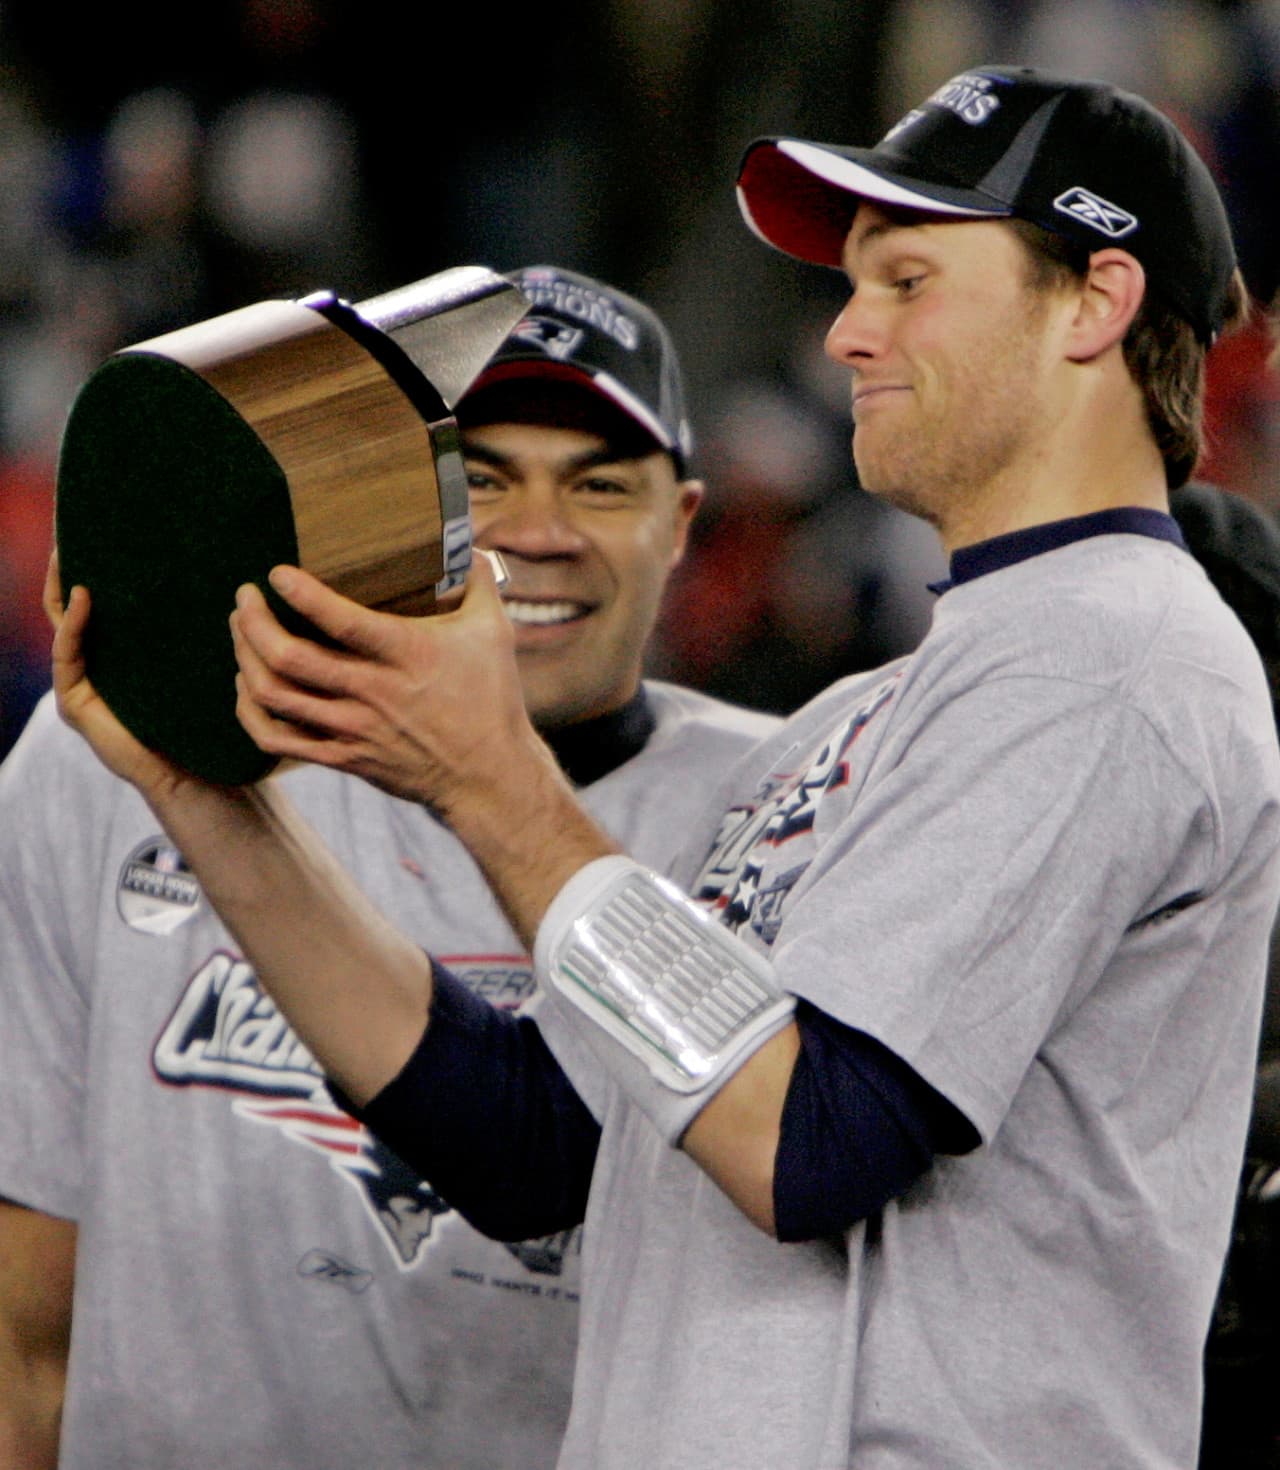 New England Patriots quarterback Tom Brady, right, holds the Lamar Hunt Trophy as Junior Seau looks on after defeating the San Diego Chargers 21-12 in the AFC Championship football game in 2008. (Winslow Townson/AP)